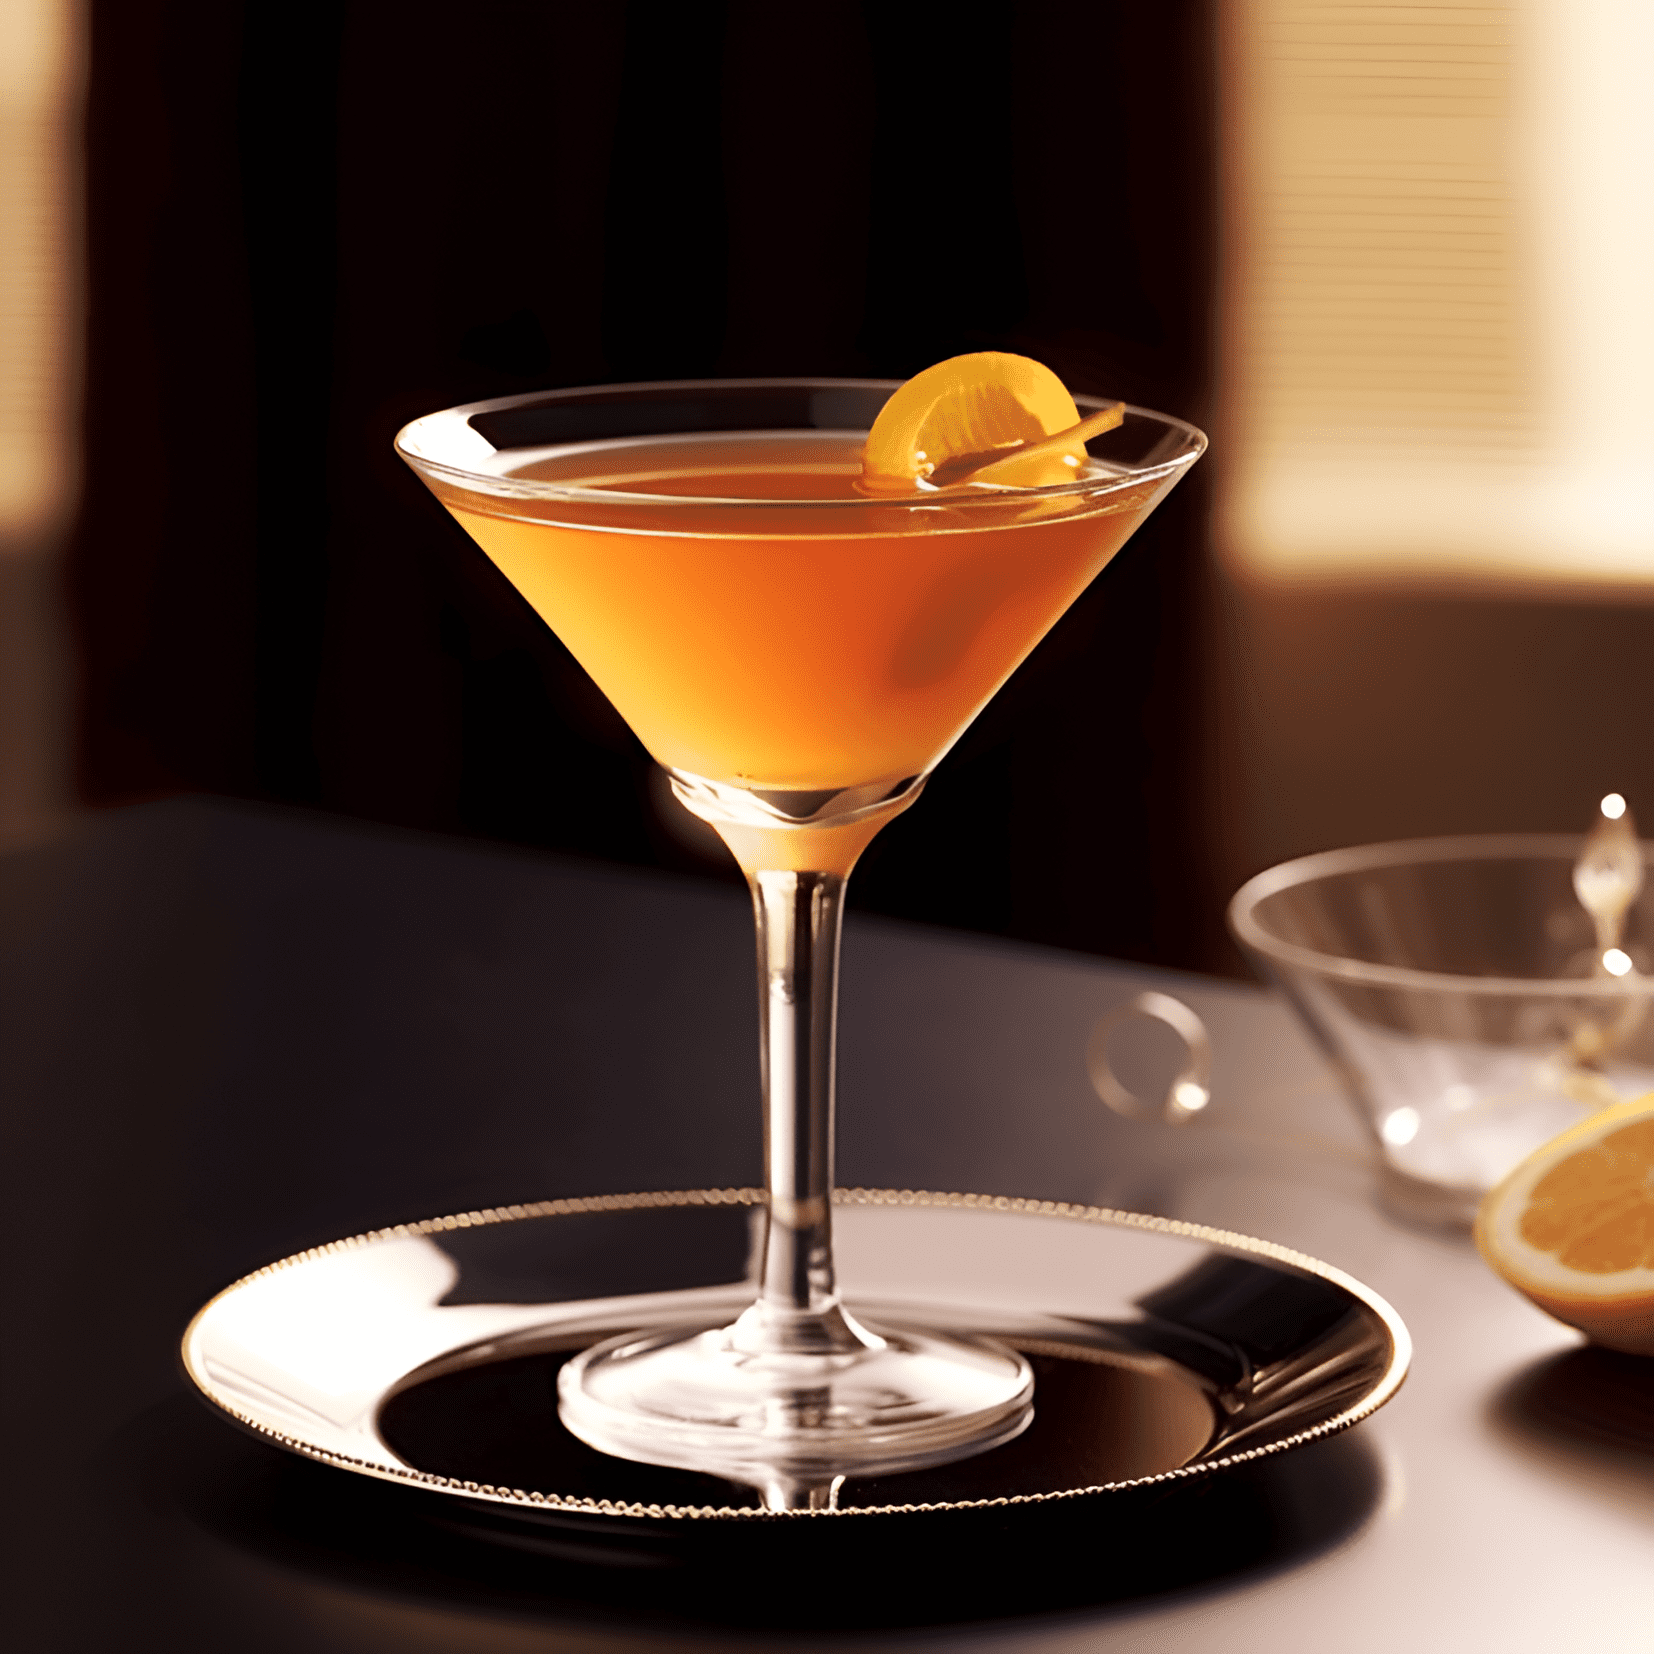 The Artillery cocktail has a bold, robust flavor profile with a perfect balance of sweetness and bitterness. It is strong, slightly sweet, and herbal with a hint of citrus.